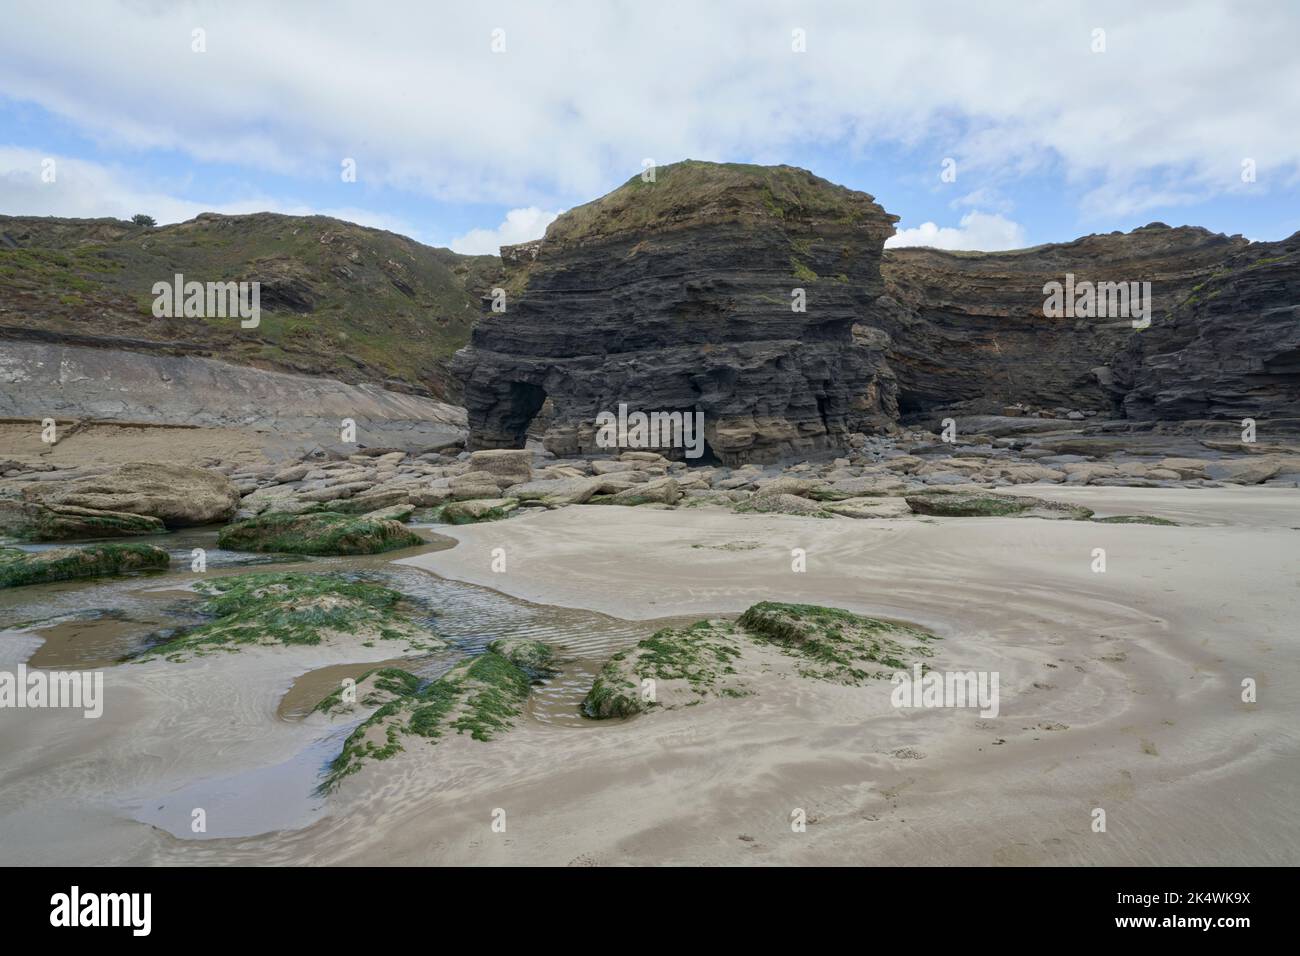 Geological arch with barnacle encrusted rocks in foreground at Broadhaven, Pembrokeshire. Stock Photo